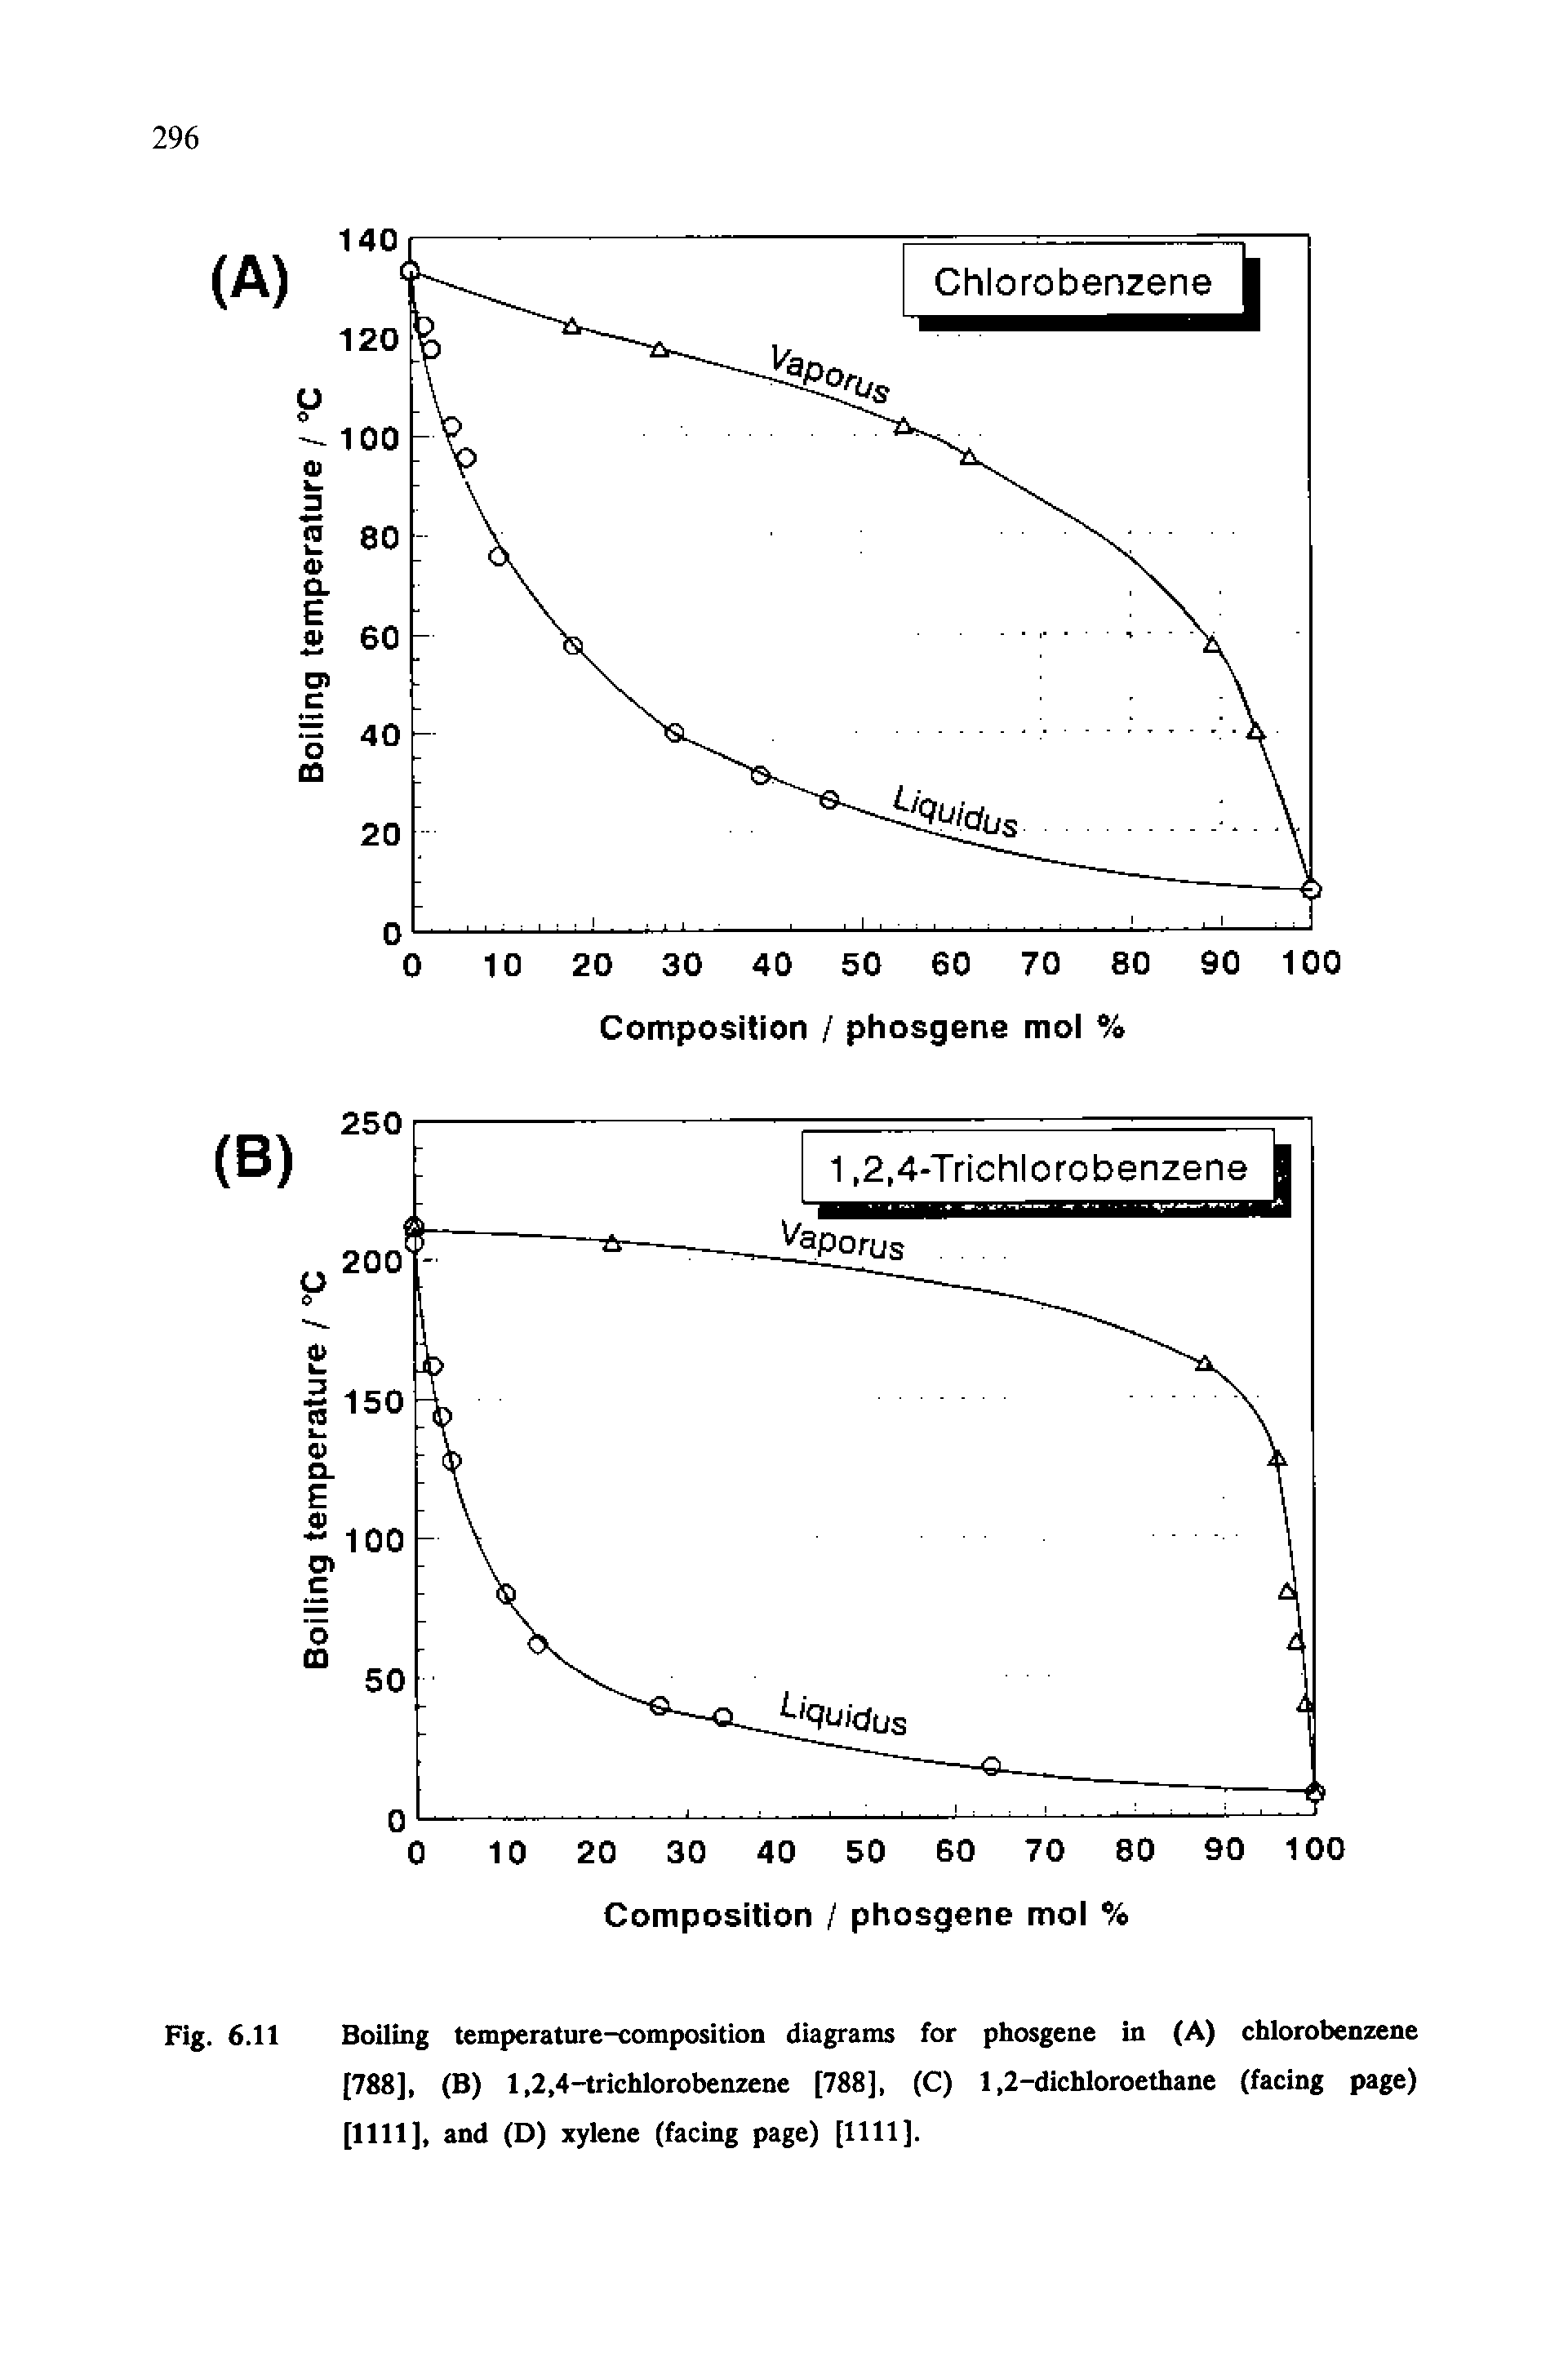 Fig. 6.11 Boiling temperature-composition diagrams for phosgene in (A) chlorobenzene [788], (B) 1,2,4-trichlorobenzene [788], (C) 1,2-dichloroethane (facing page) [1111], and (D) xylene (facing page) [1111].